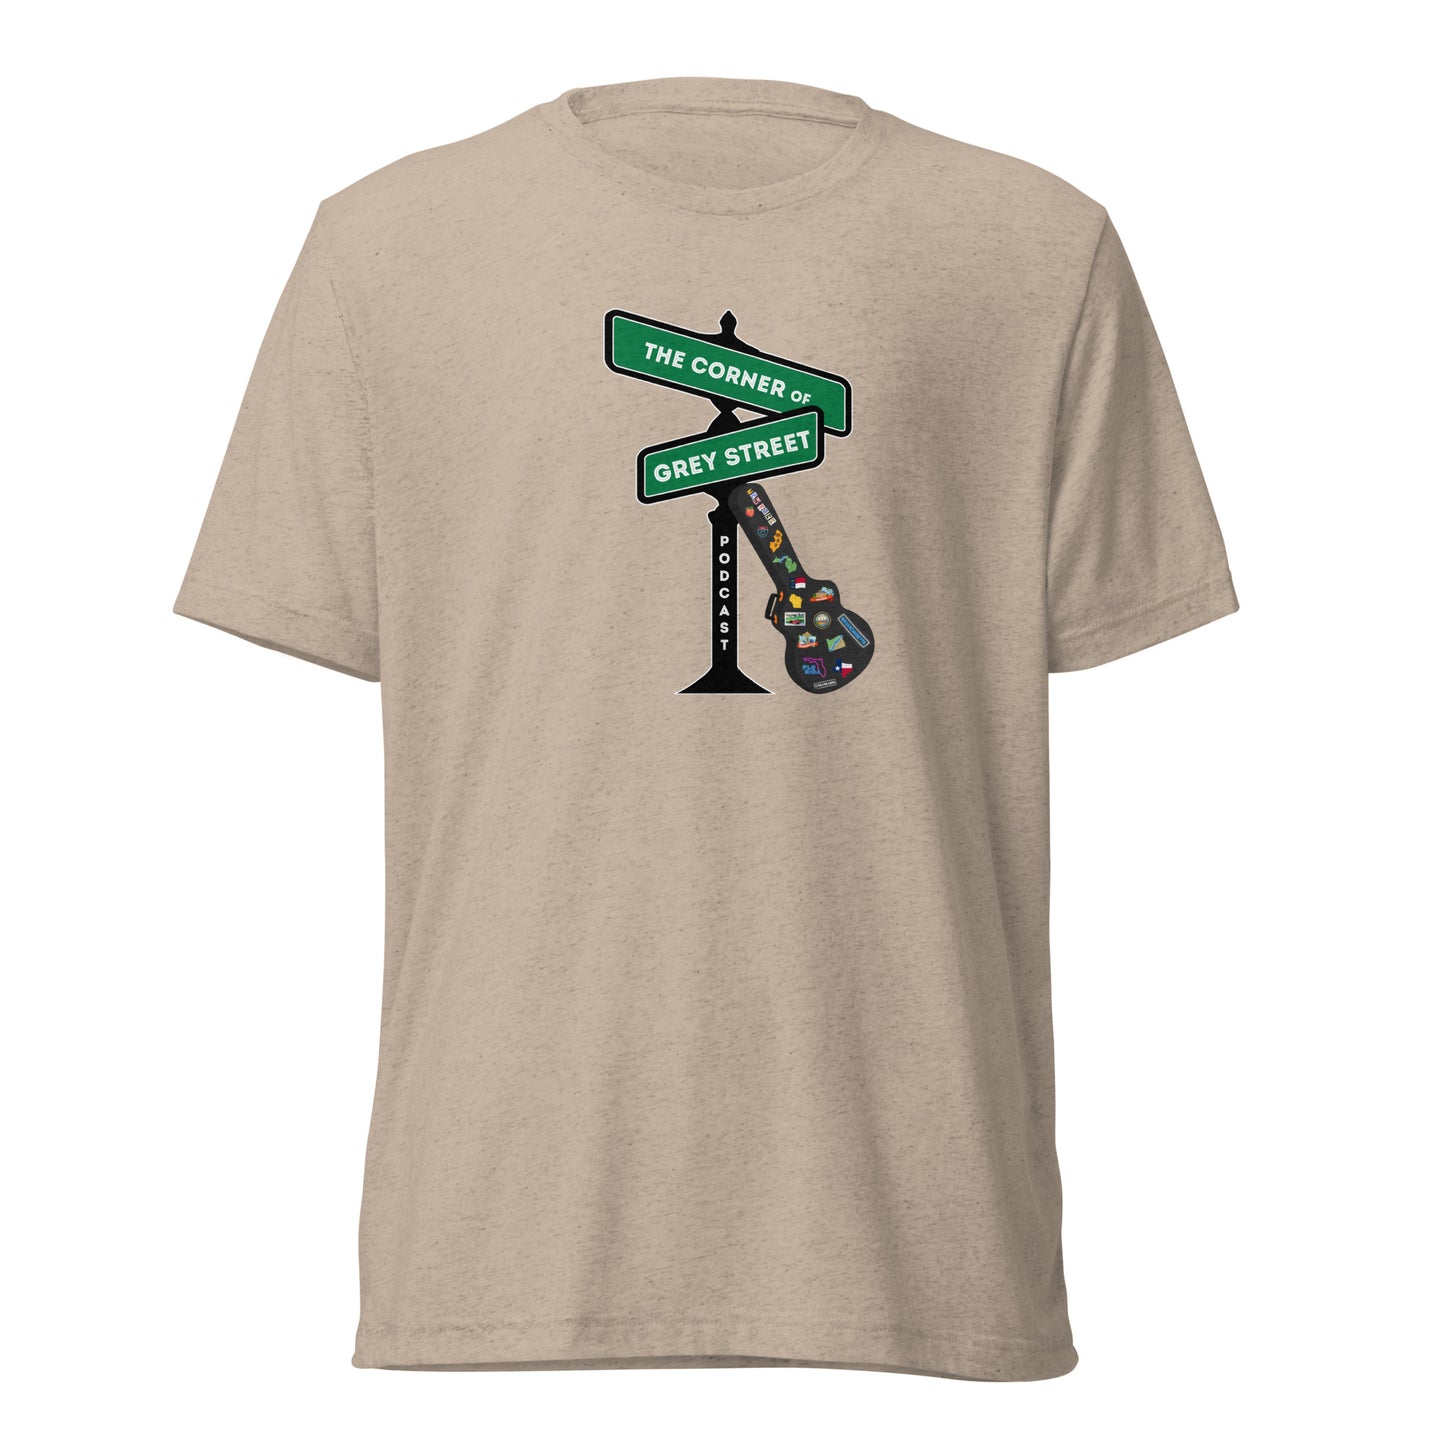 COGS On The Road Shirt